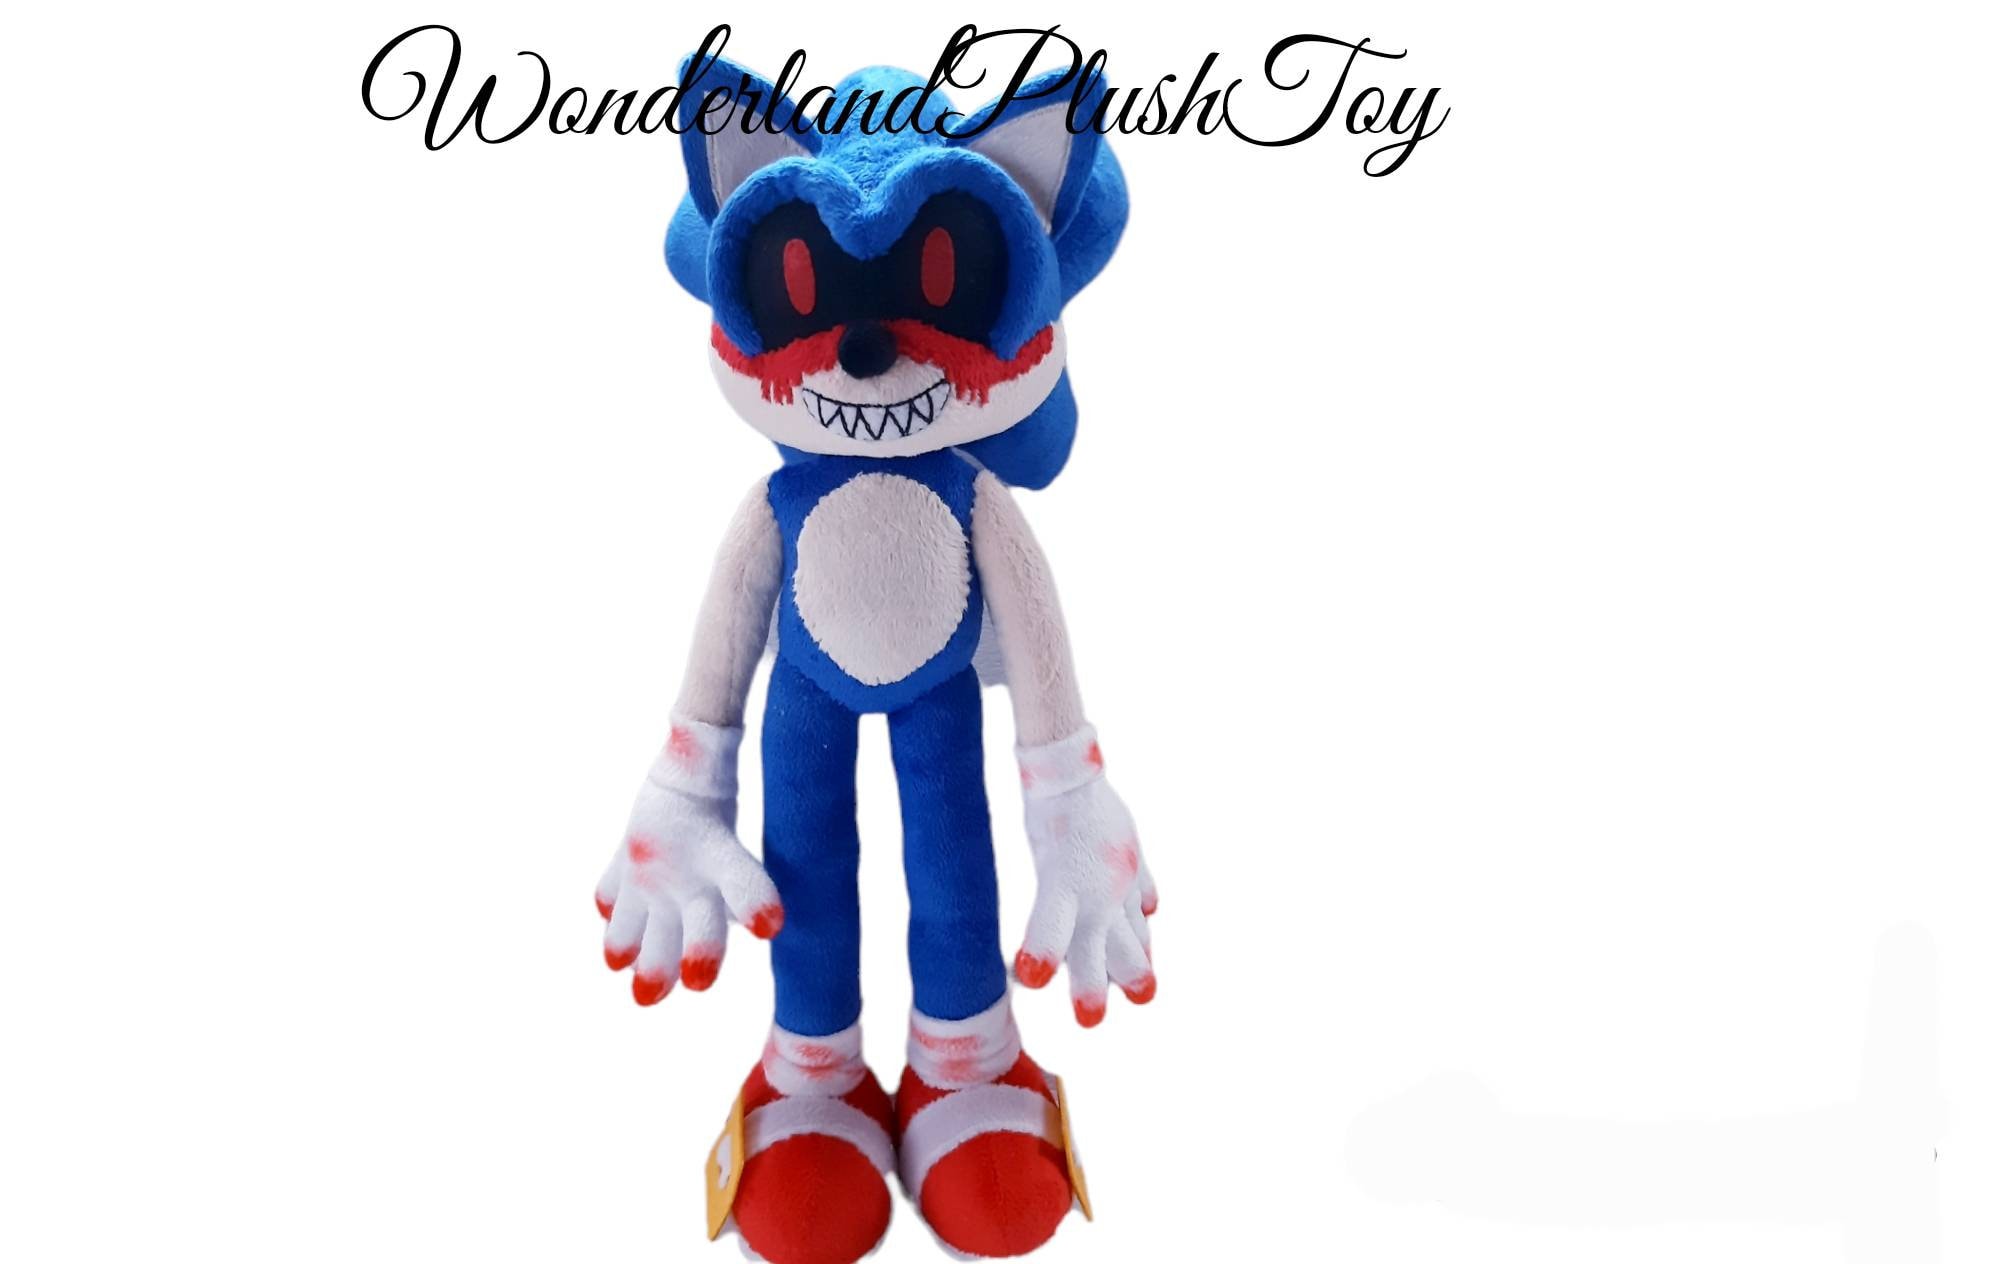 Sonic Exe Gifts & Merchandise for Sale